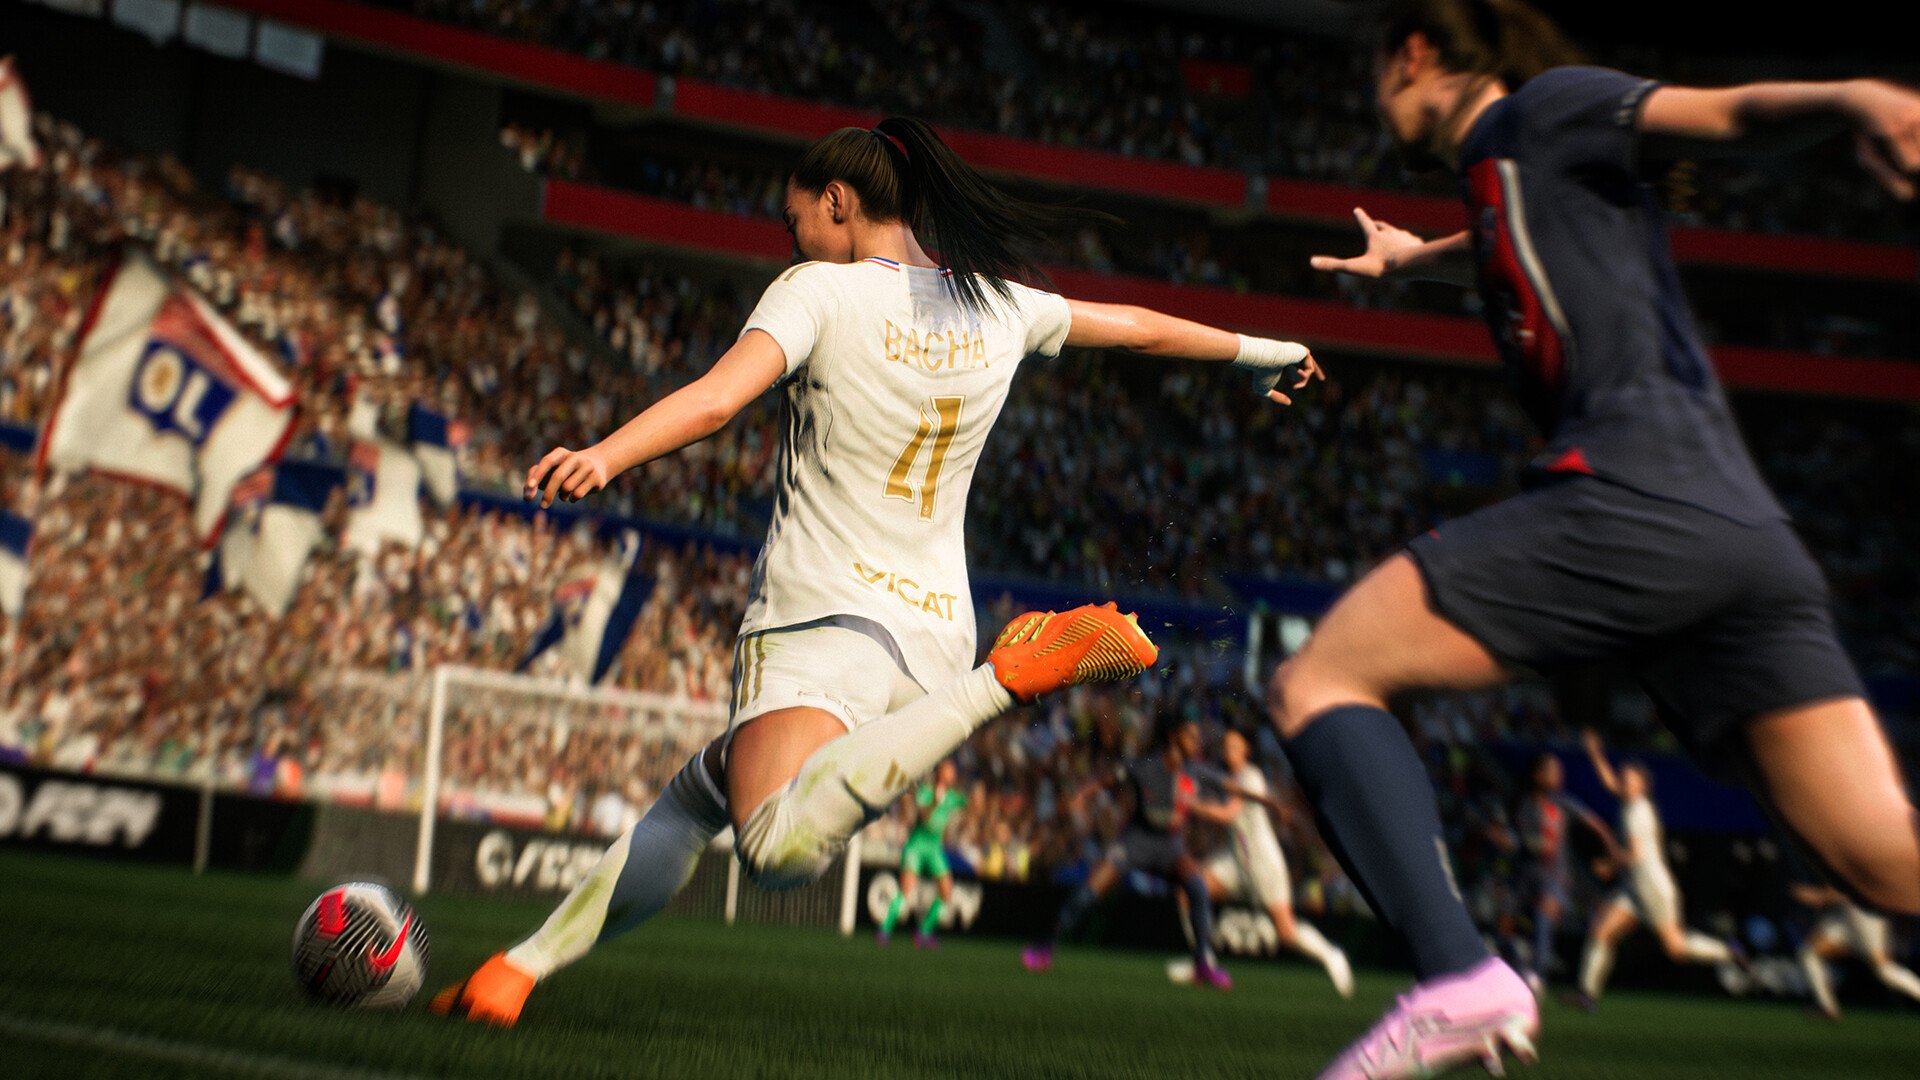 FC 24 release date, UK start time for EA FC 24 launch